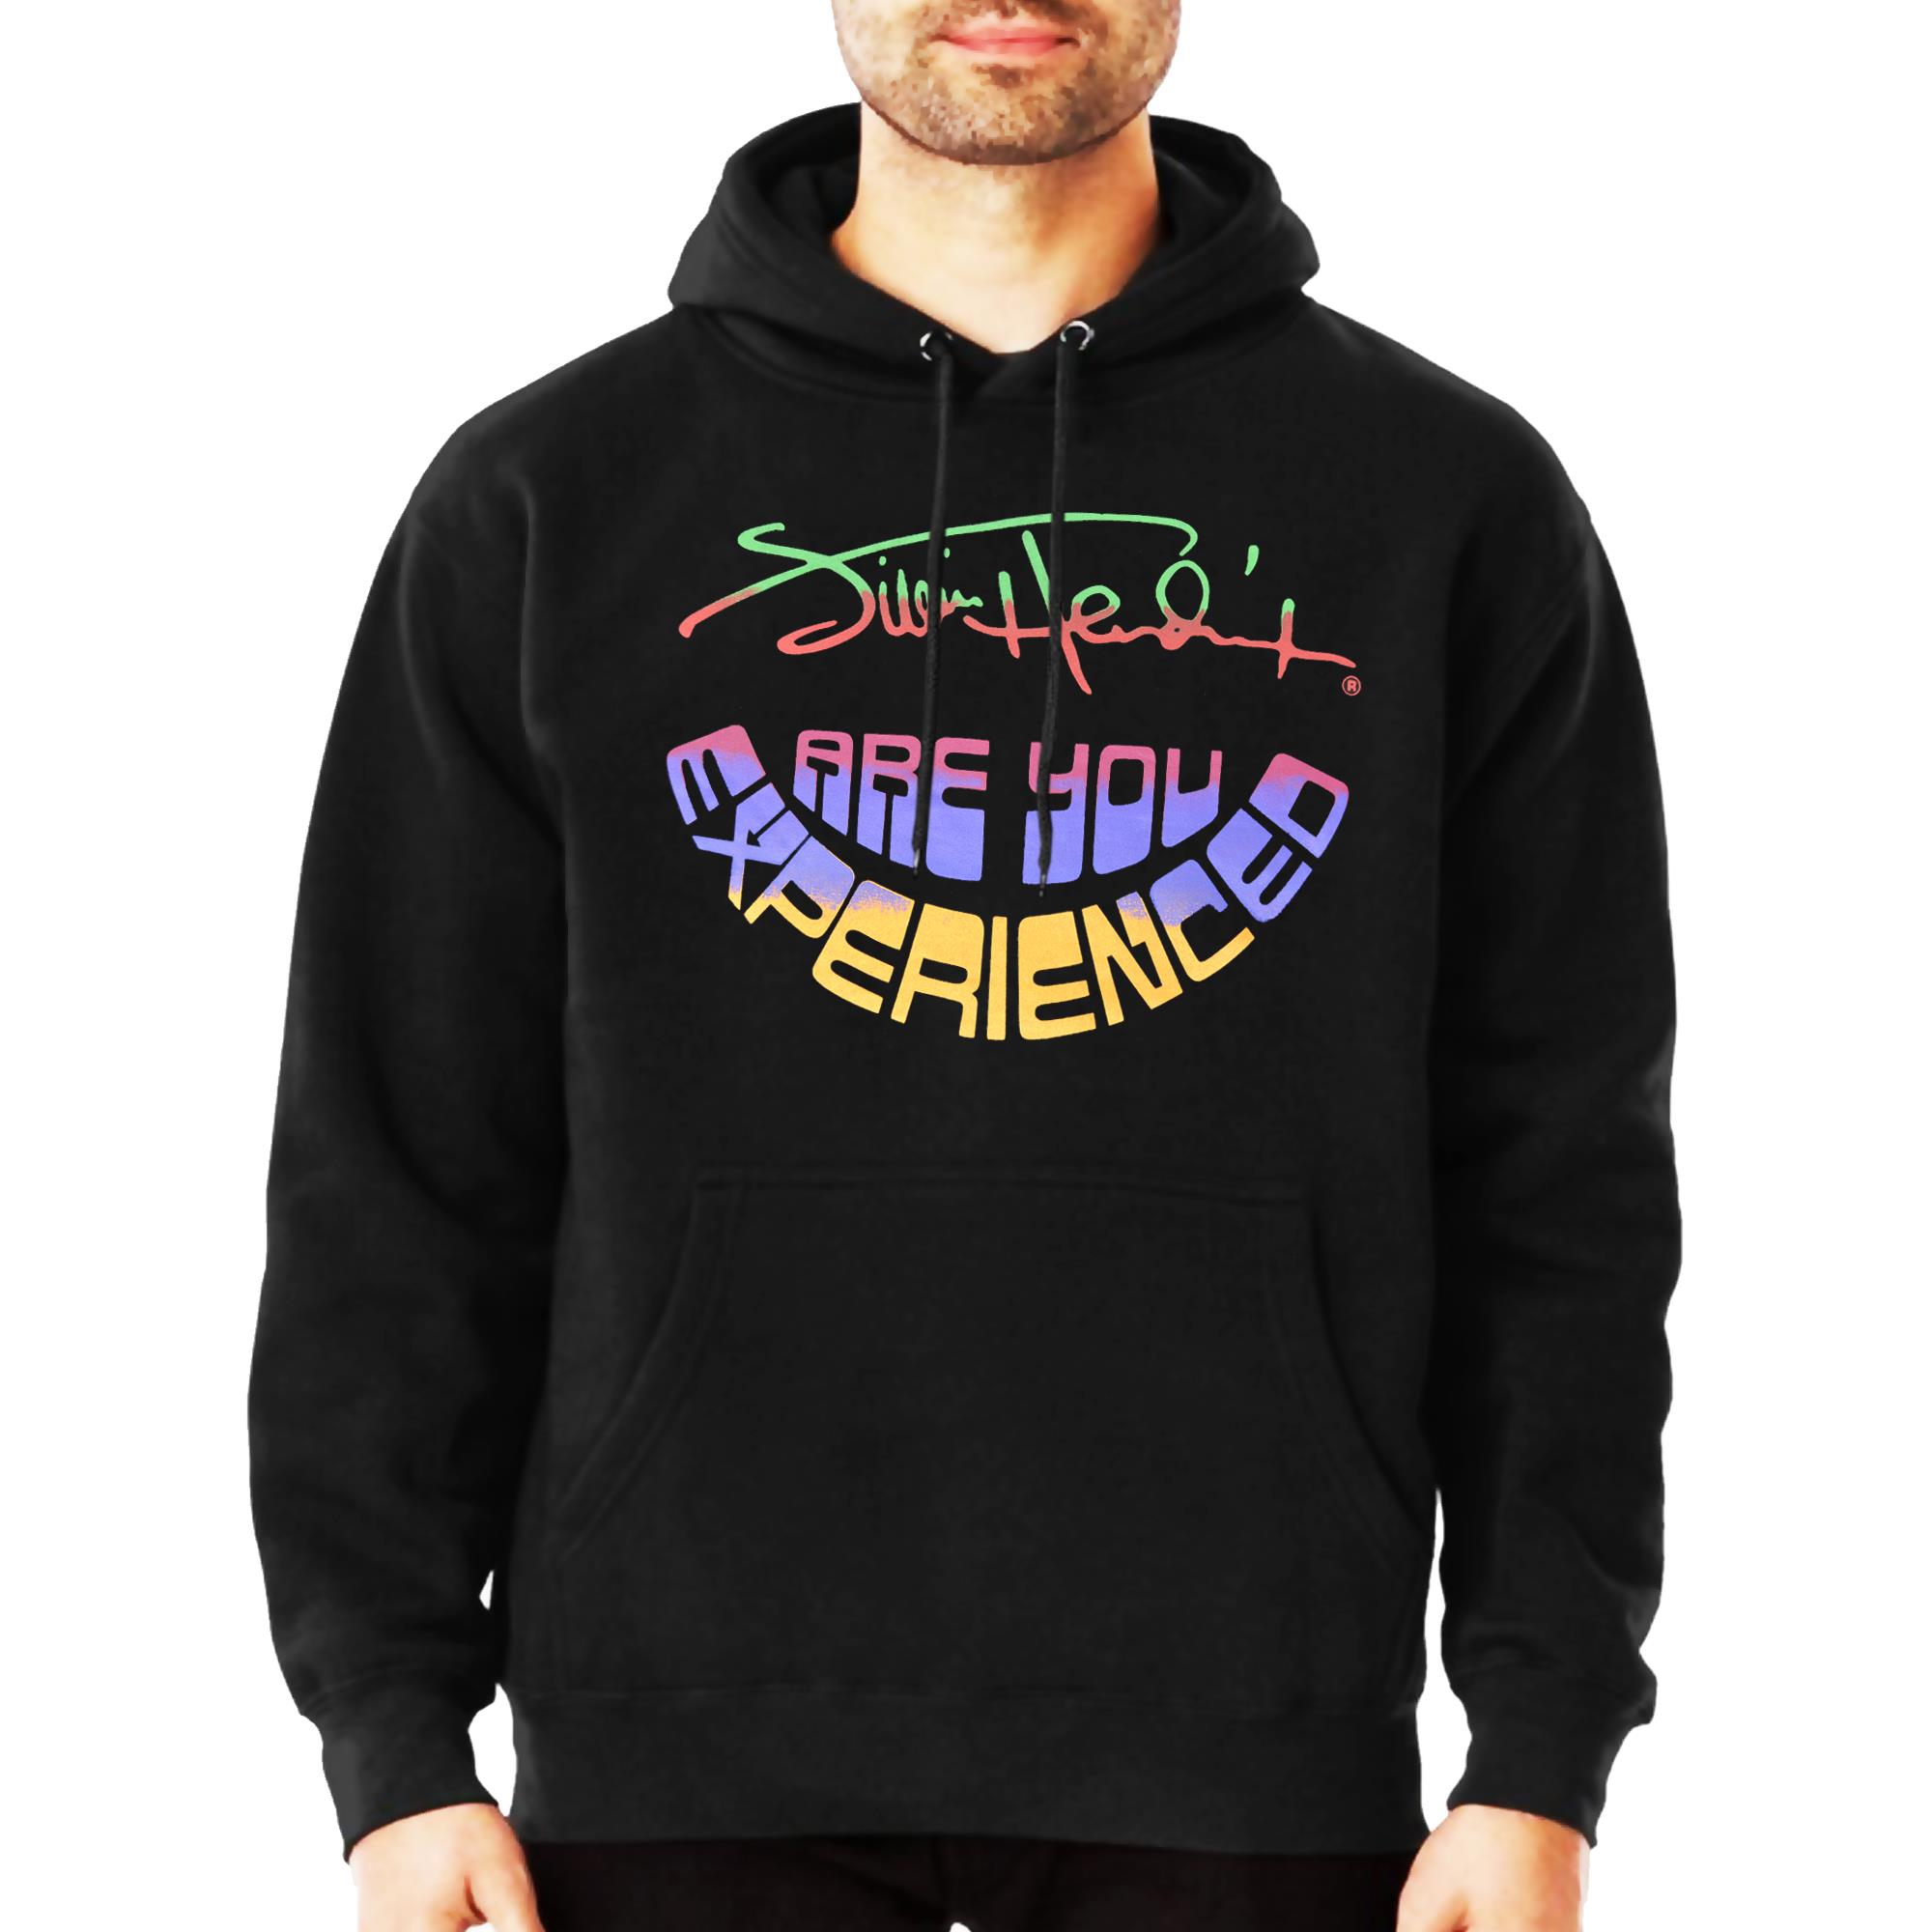 Are You Expericenced Hoodie